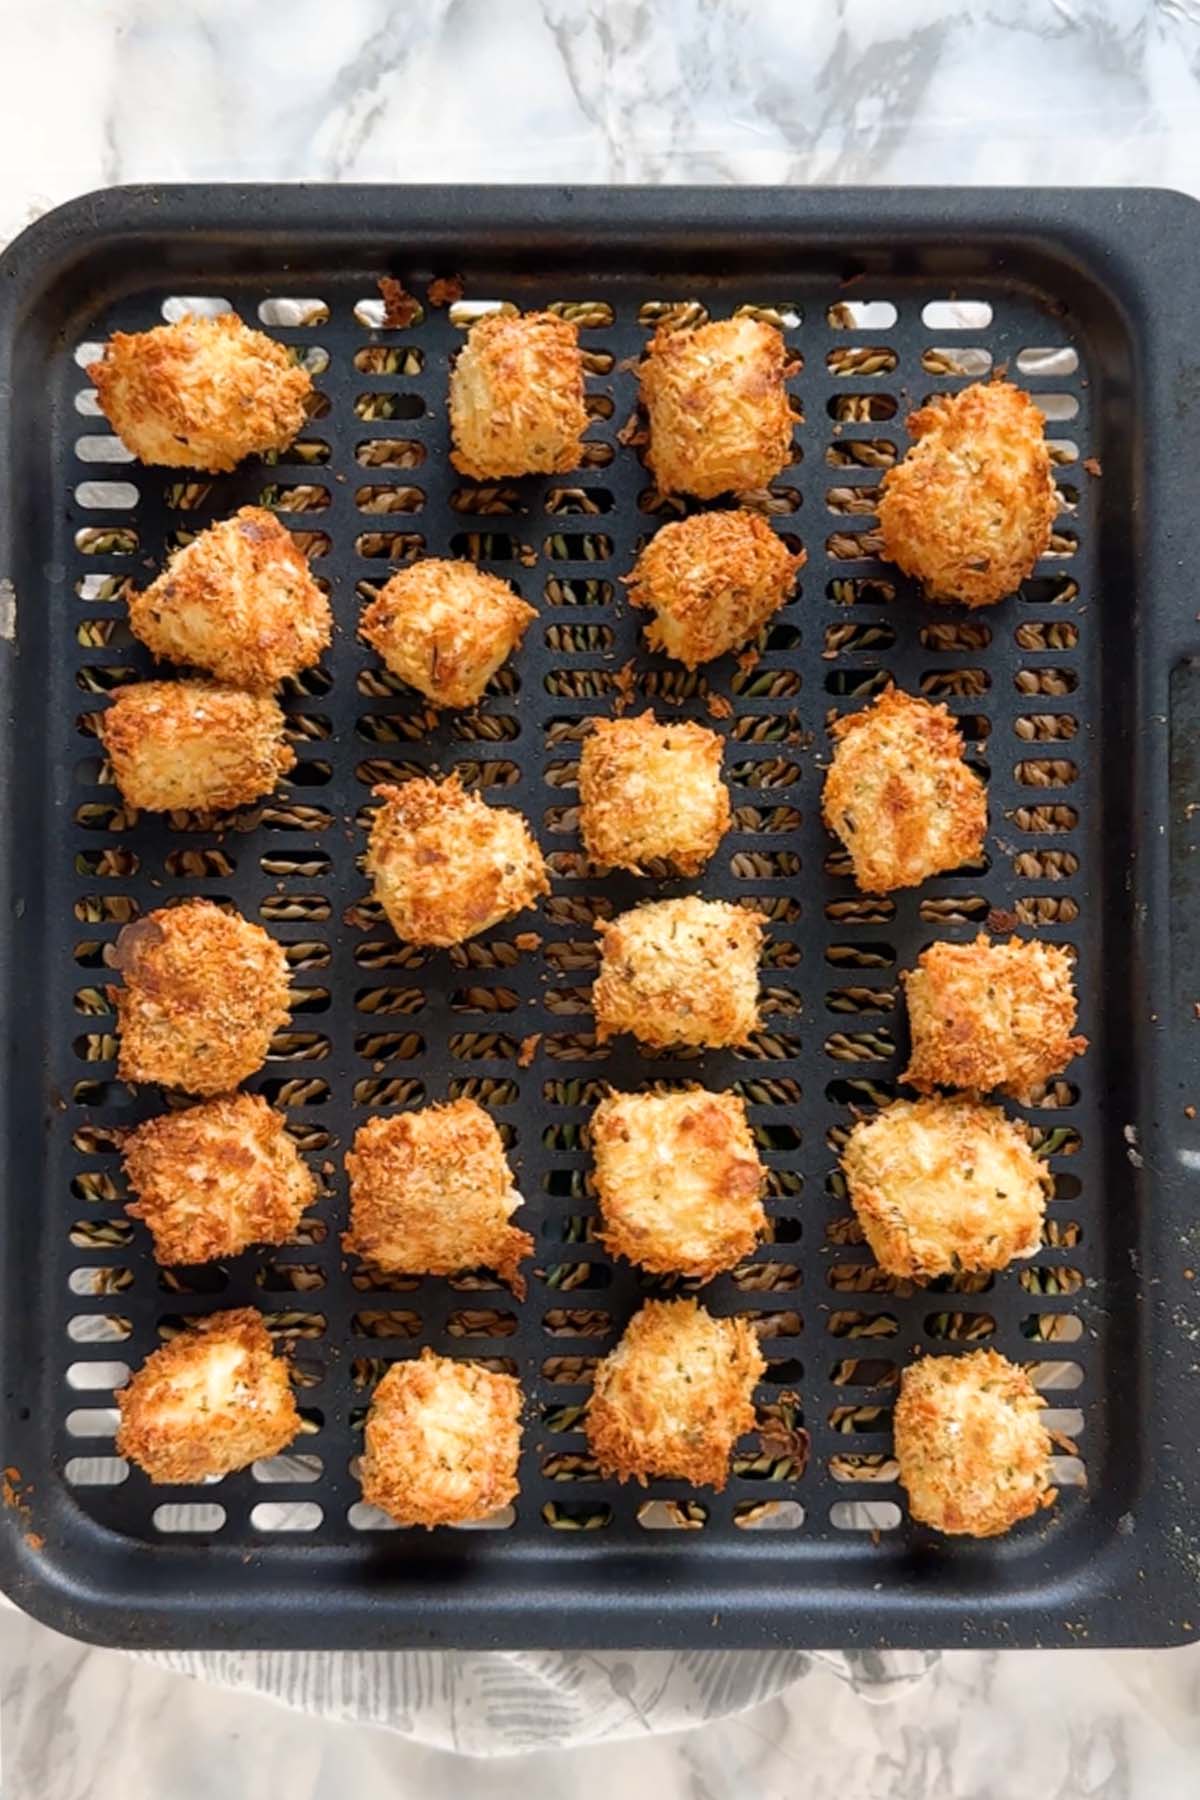 Cooked breaded halloumi bites on an air fryer tray.